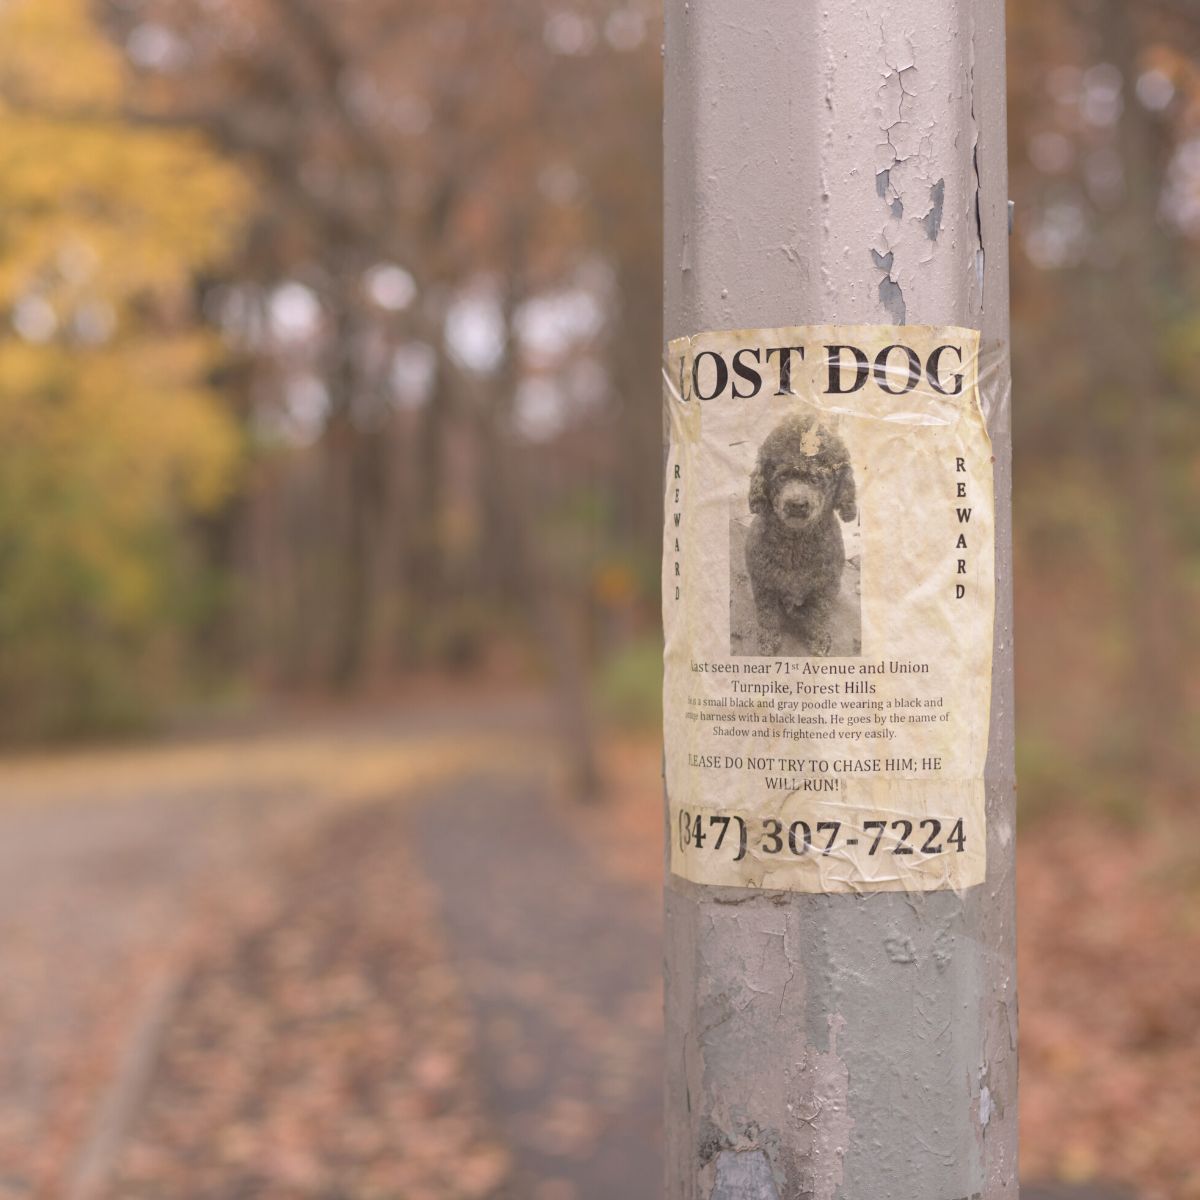 A lost dog poster is taped to a light post in the woods.